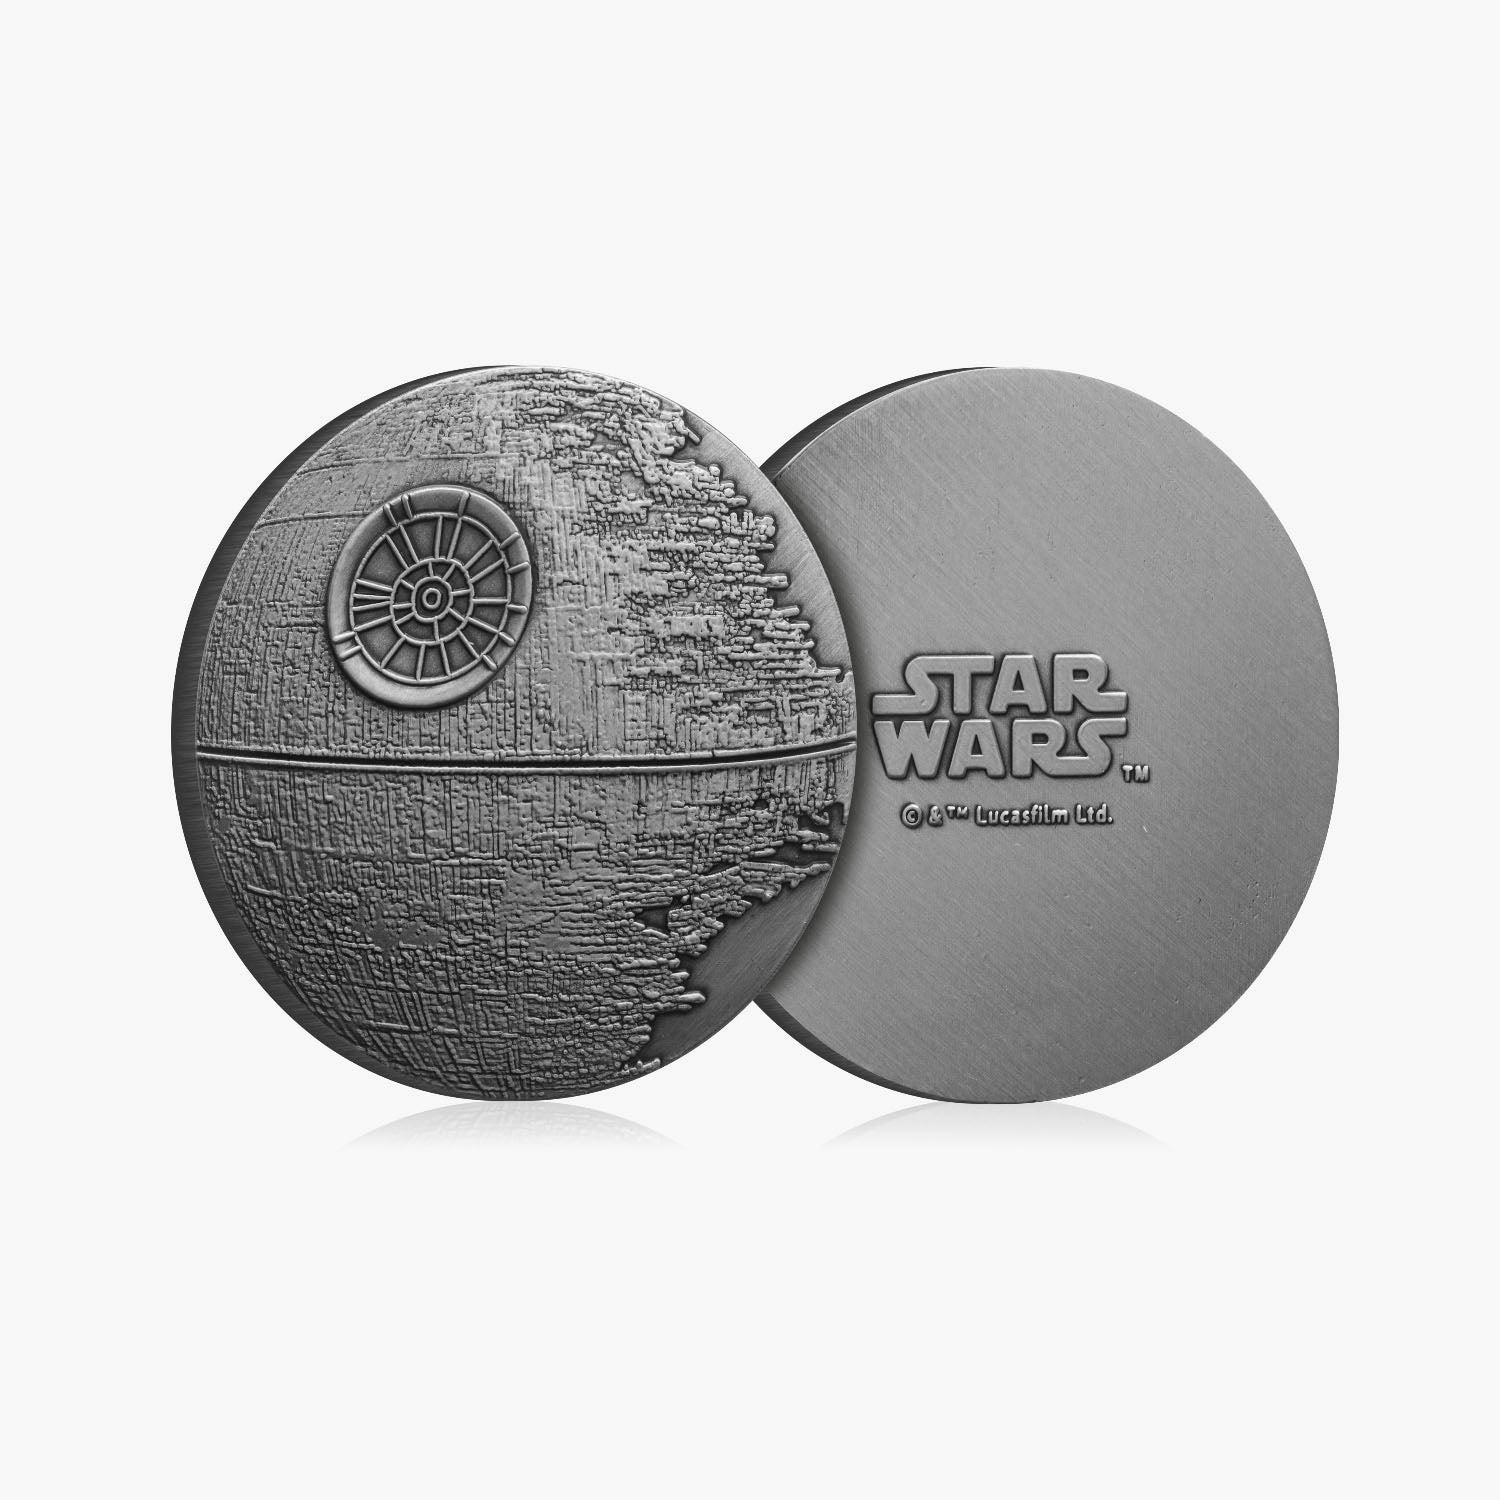 Official Star Wars Death Star Shaped Commemorative